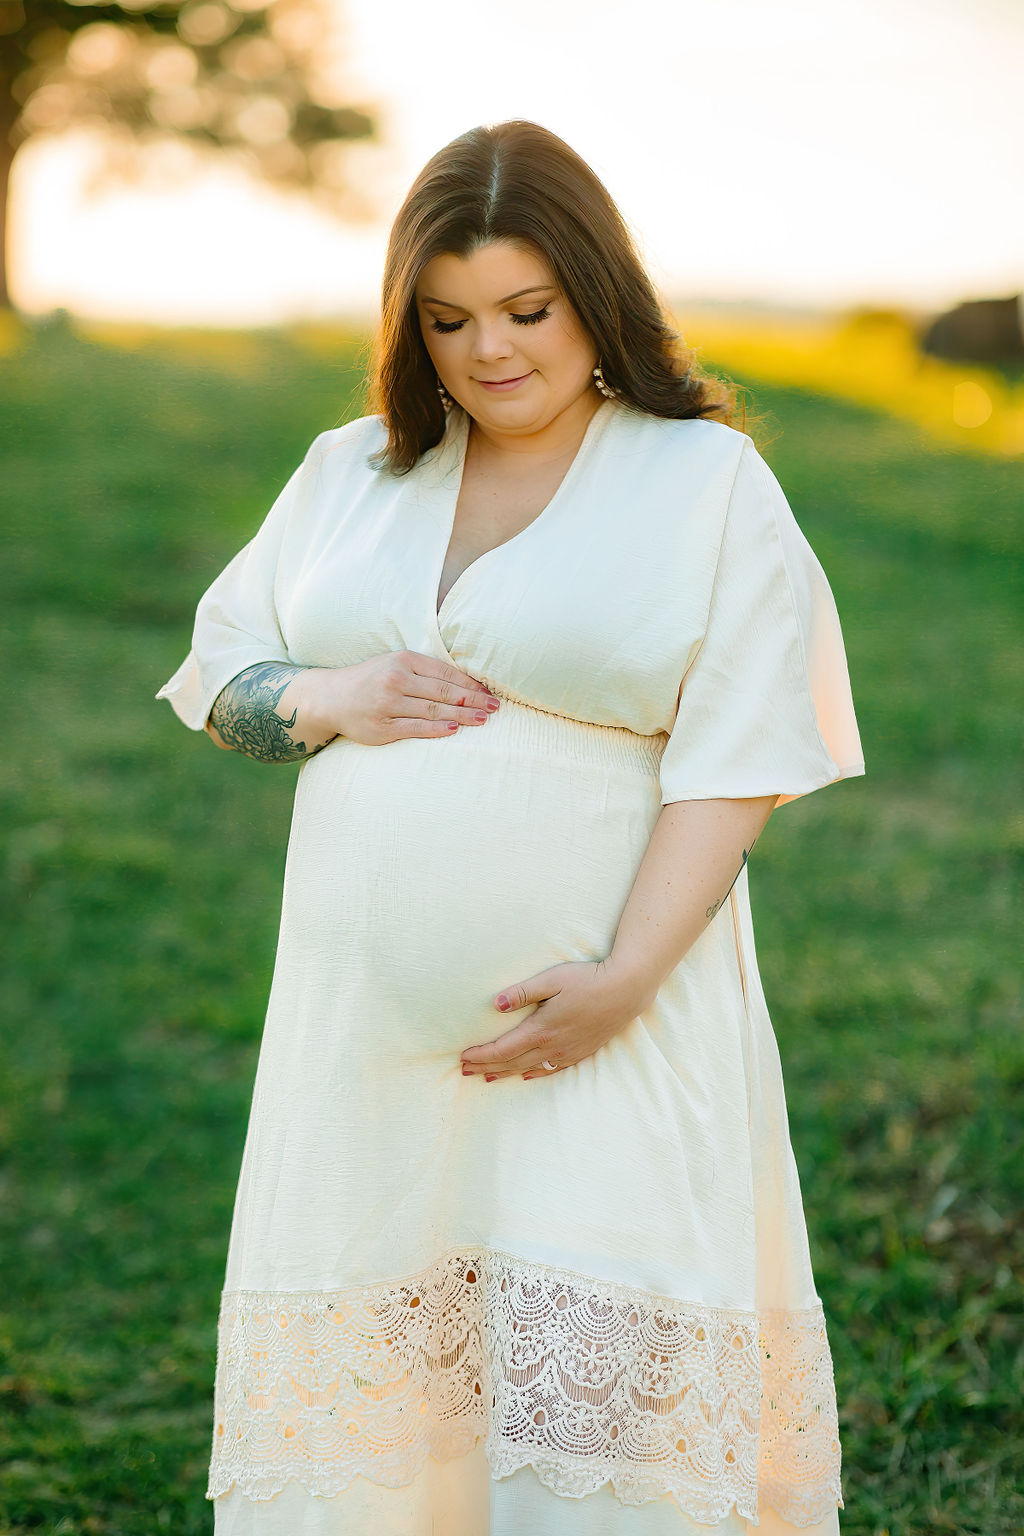 A mother to be in a white and lace maternity dress stands in a green field looking down at her bump cedar stones wellness spa